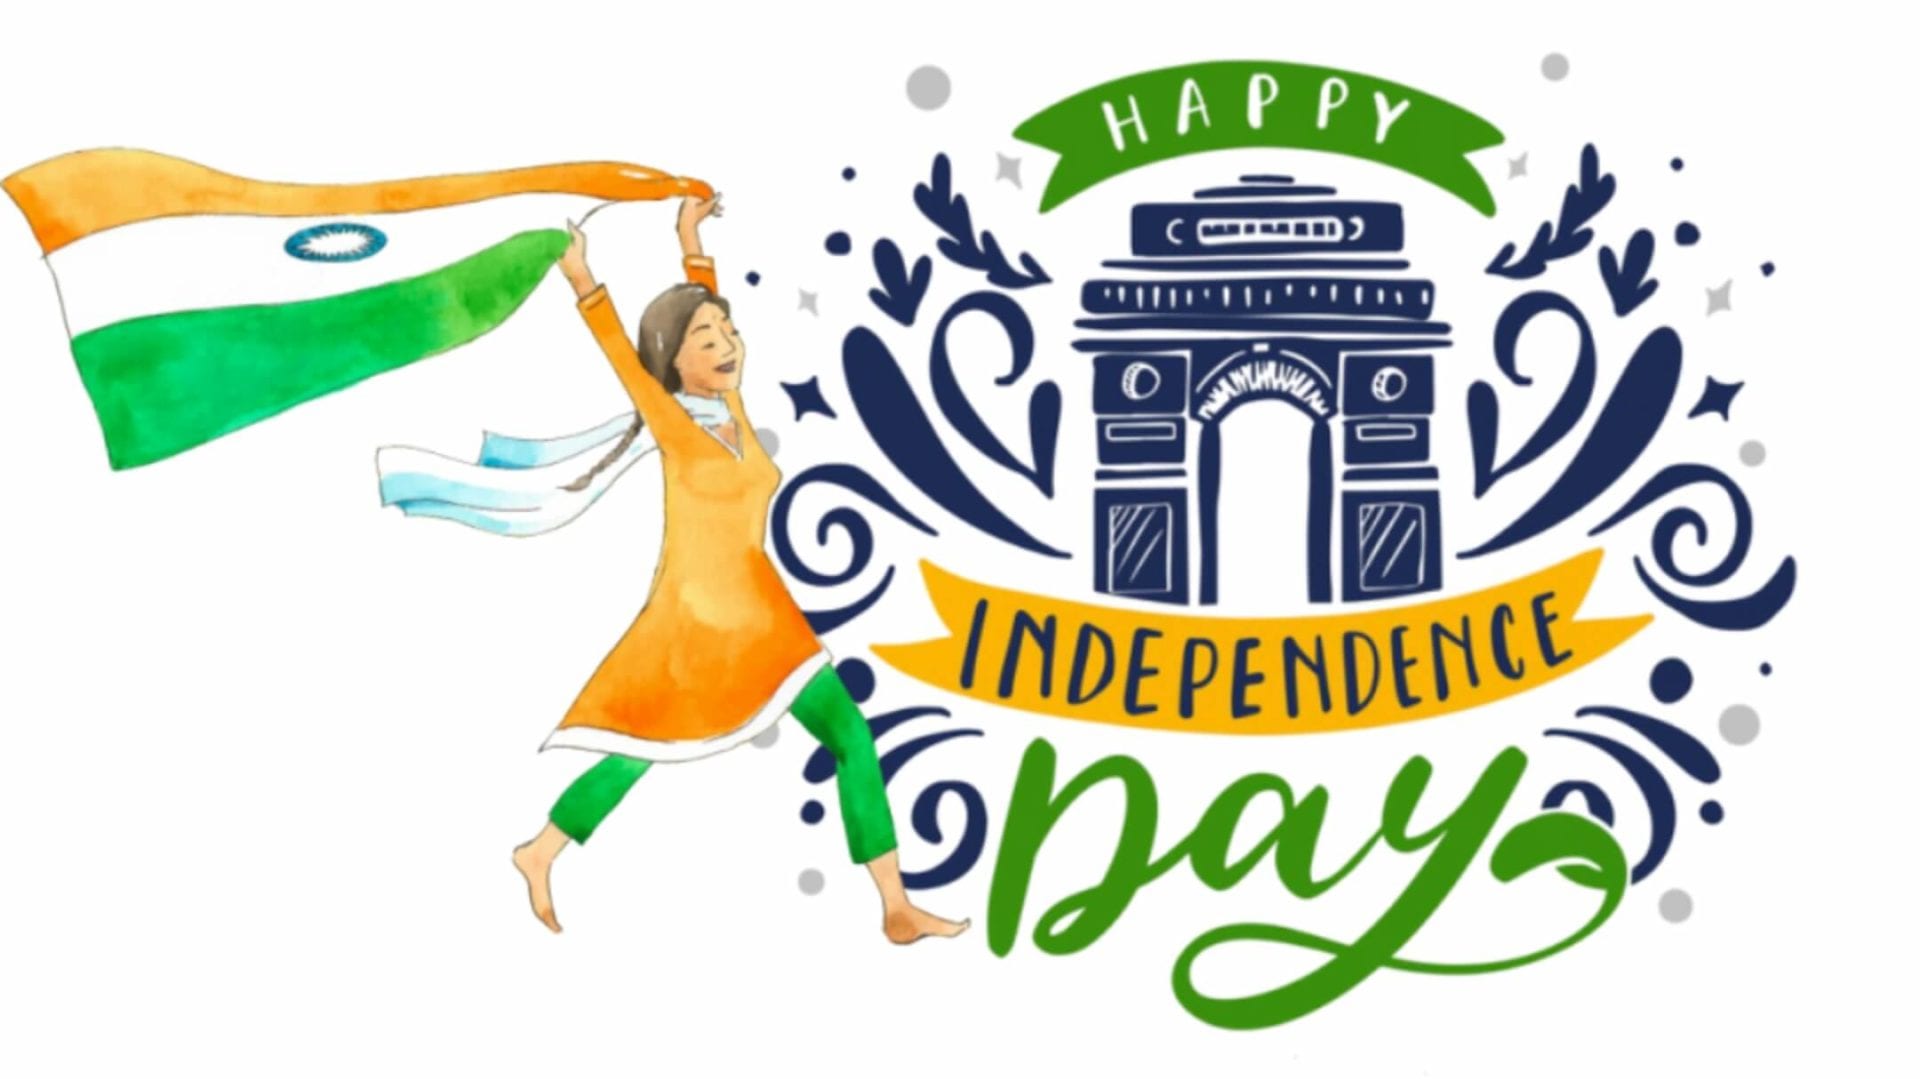 Happy Independence Day 2020 Wishes Quotes And Status With Image